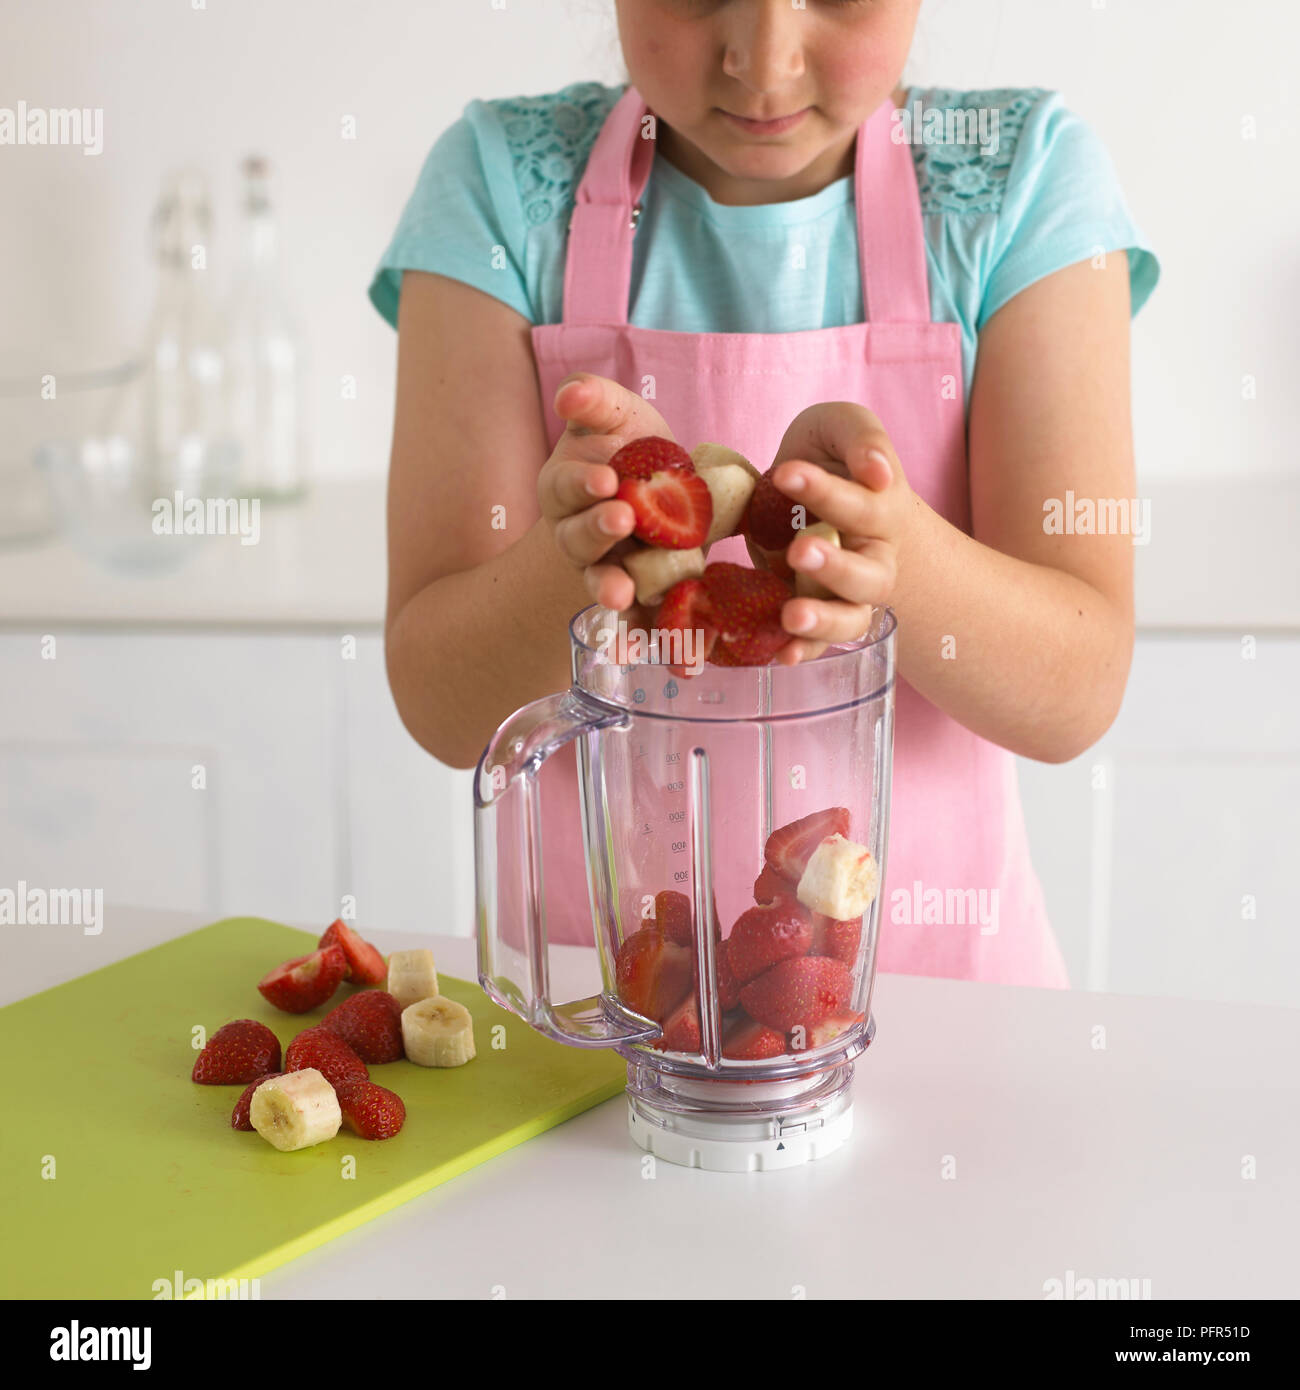 Girl placing strawberries and bananas into a blender, 8 years Stock Photo